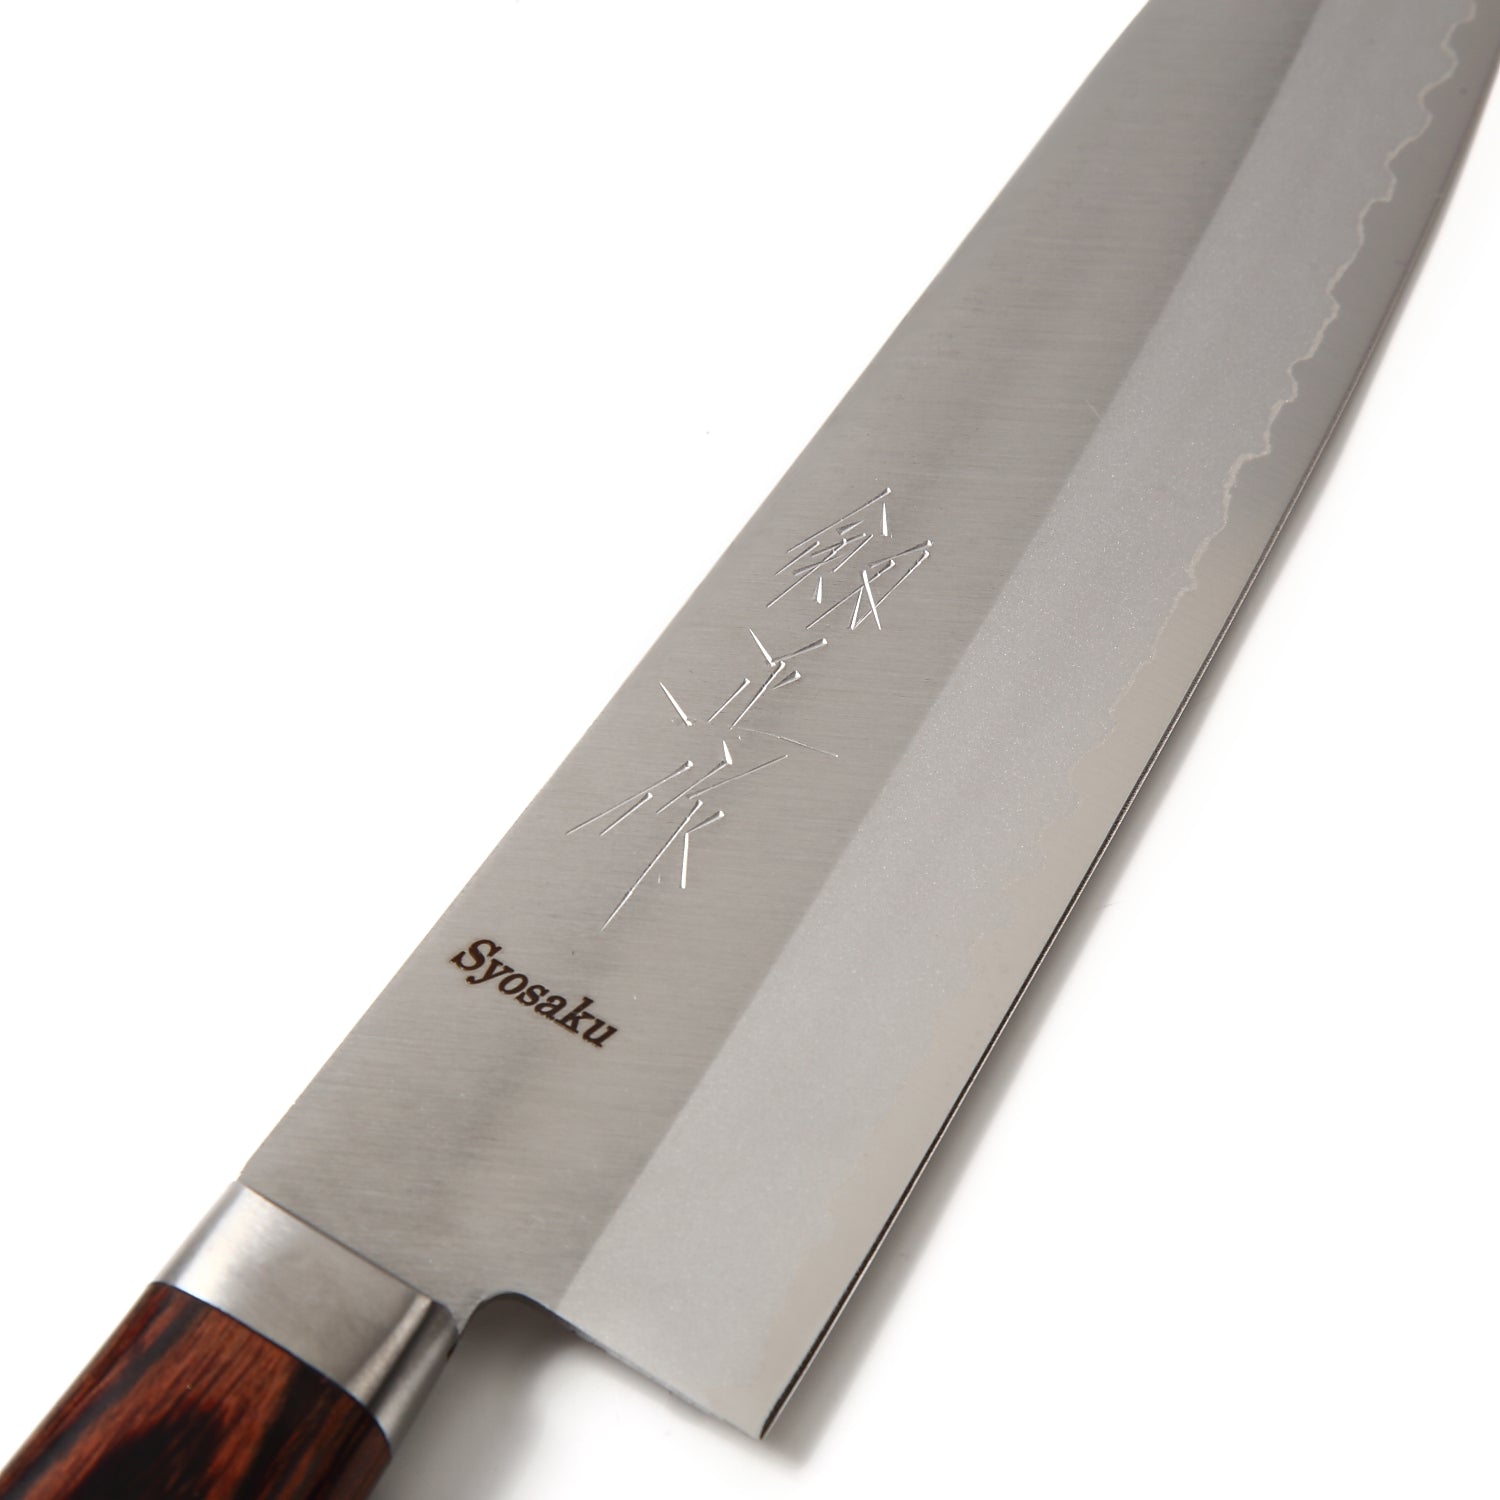 The 7 Best Japanese Knives